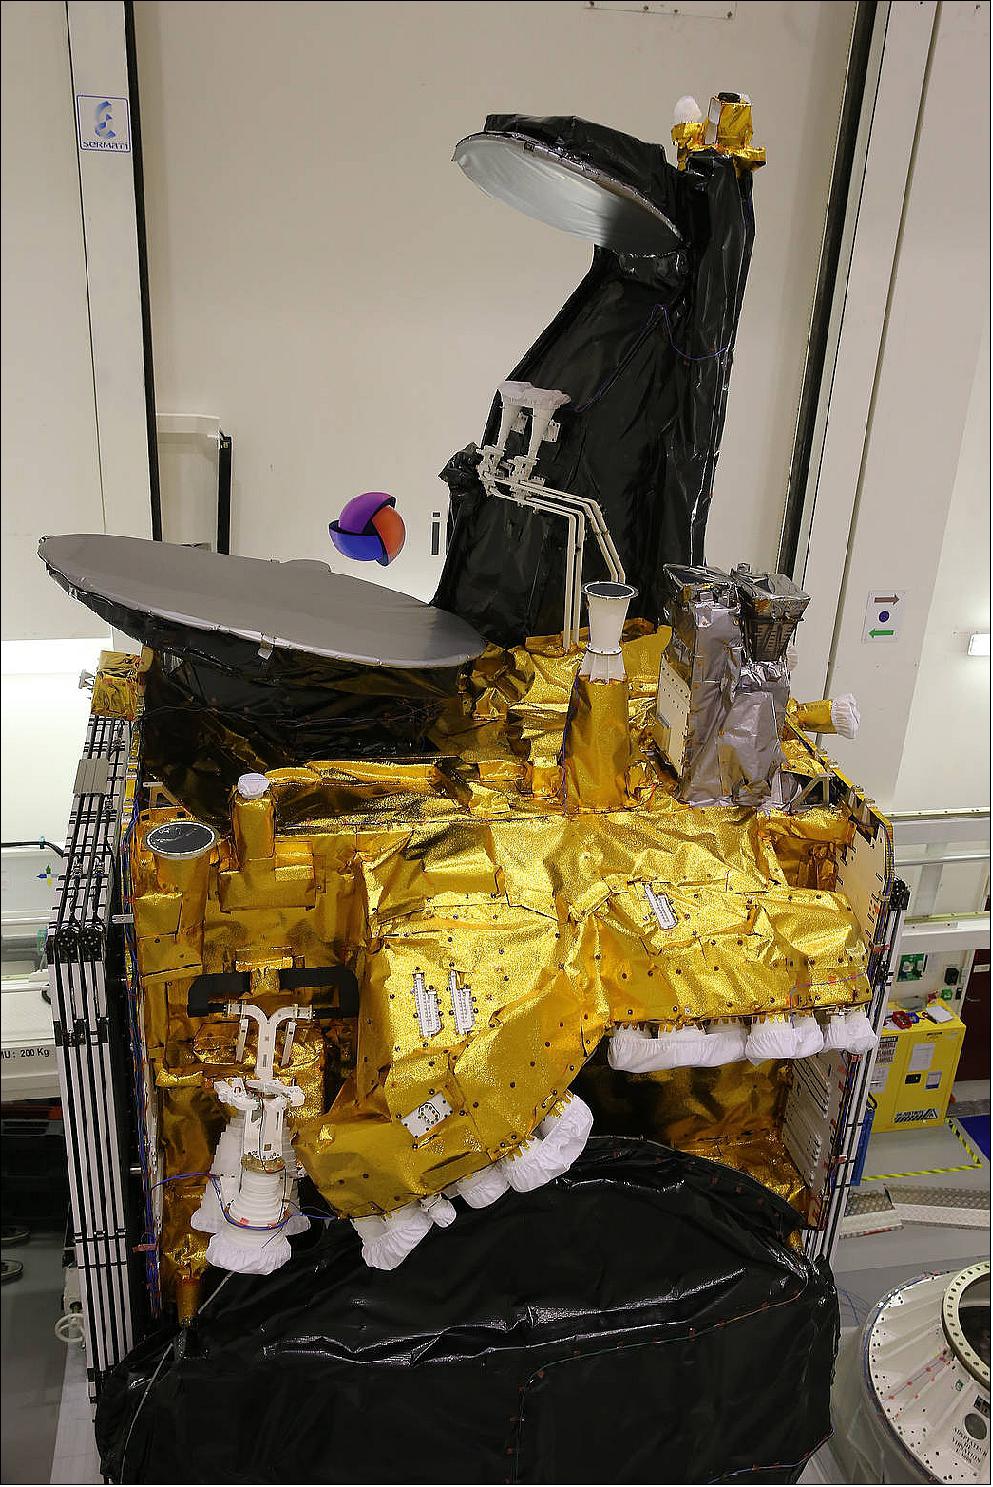 Figure 6: The GOLD instrument (the gray and white object located on the front right corner of the top deck) has completed environmental testing and is shown here on the SES-14 spacecraft in preparation for a scheduled January 2018 launch date (image credit: Airbus DS) 12)